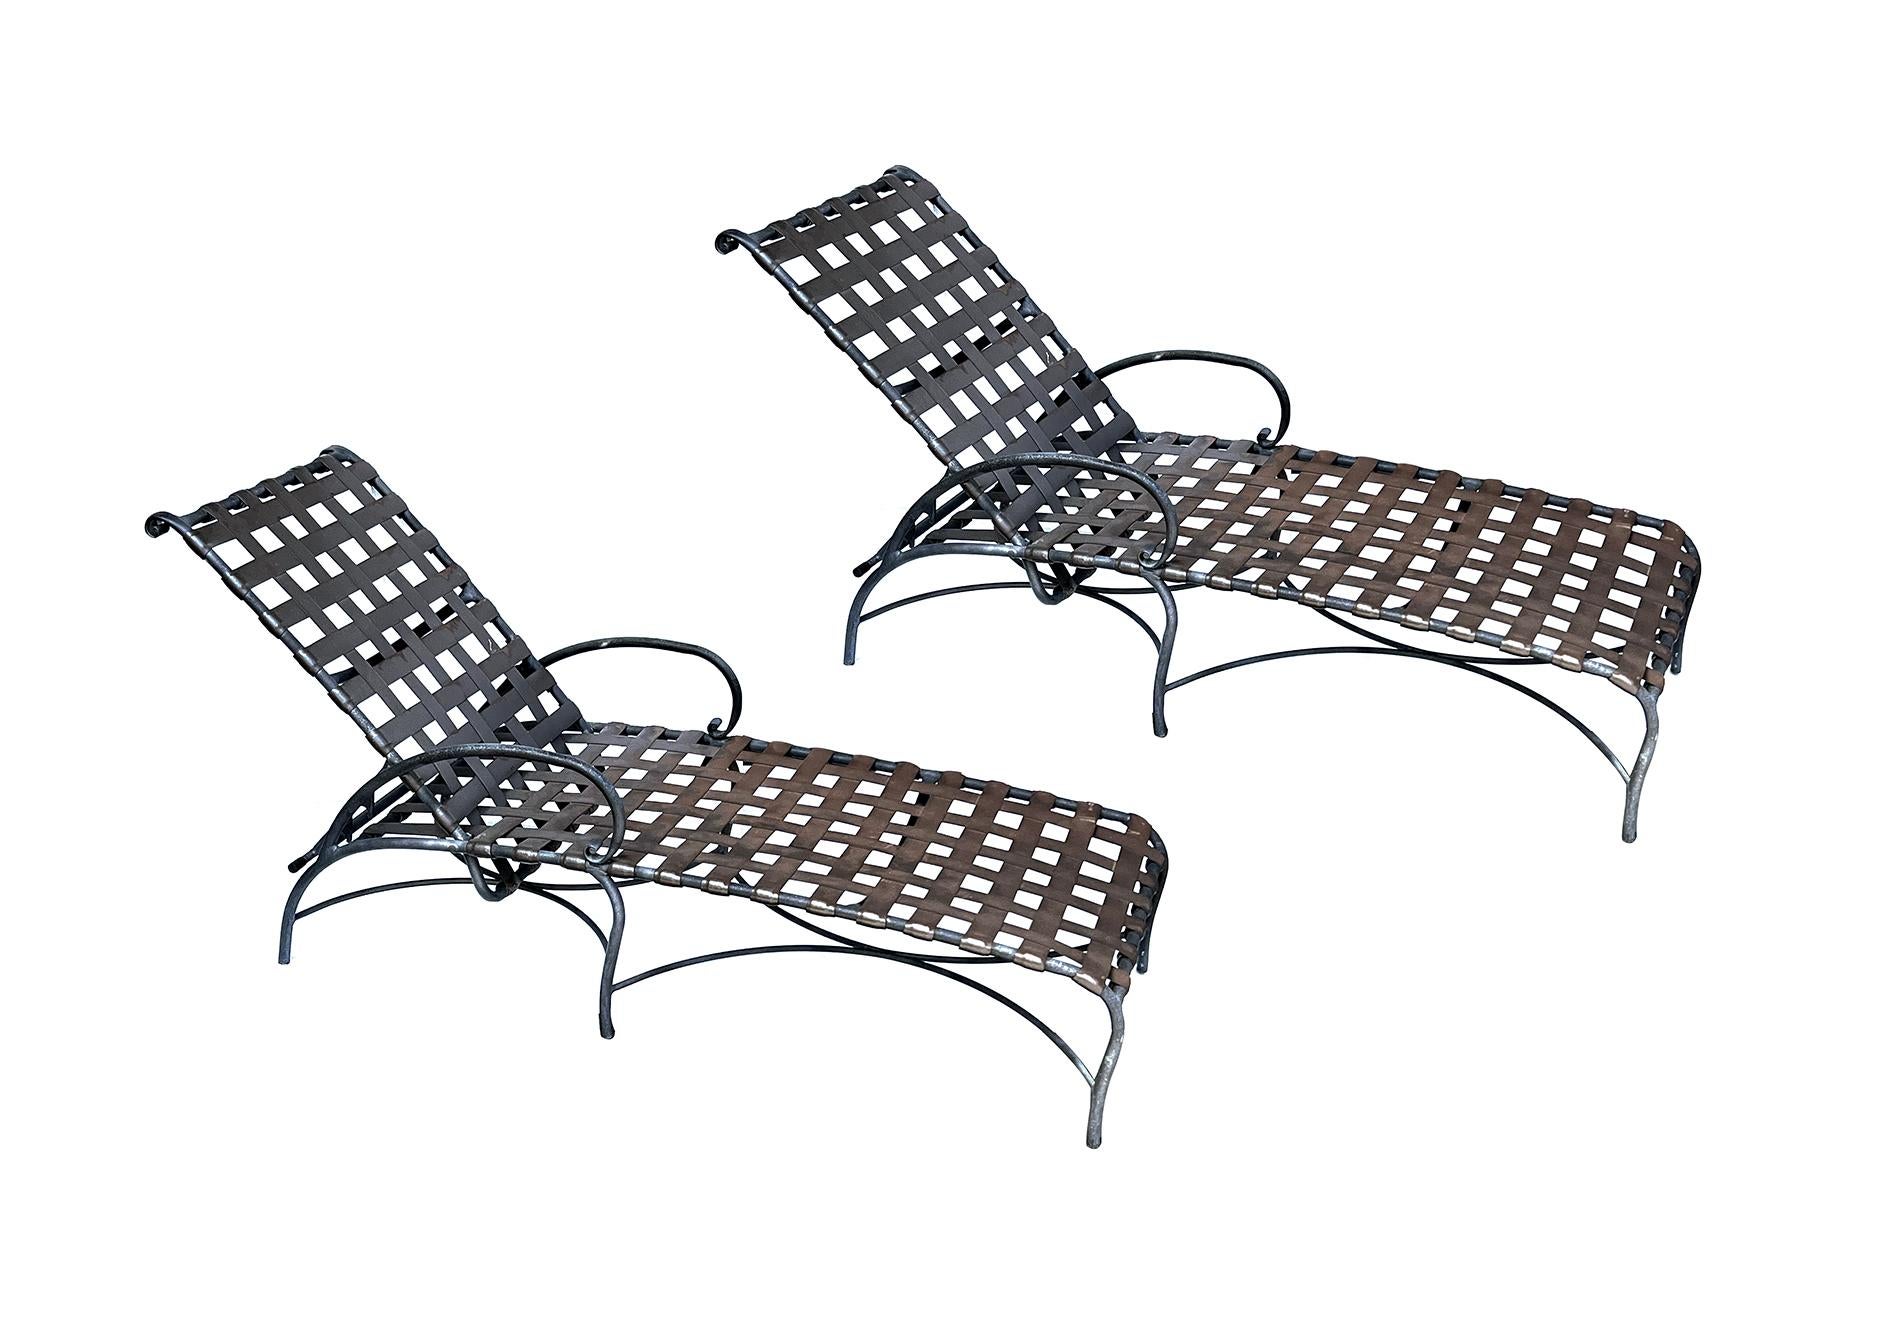 consisting of 2 chaise lounges, 4 armchairs, and 2 marquise-style over-scaled armchairs